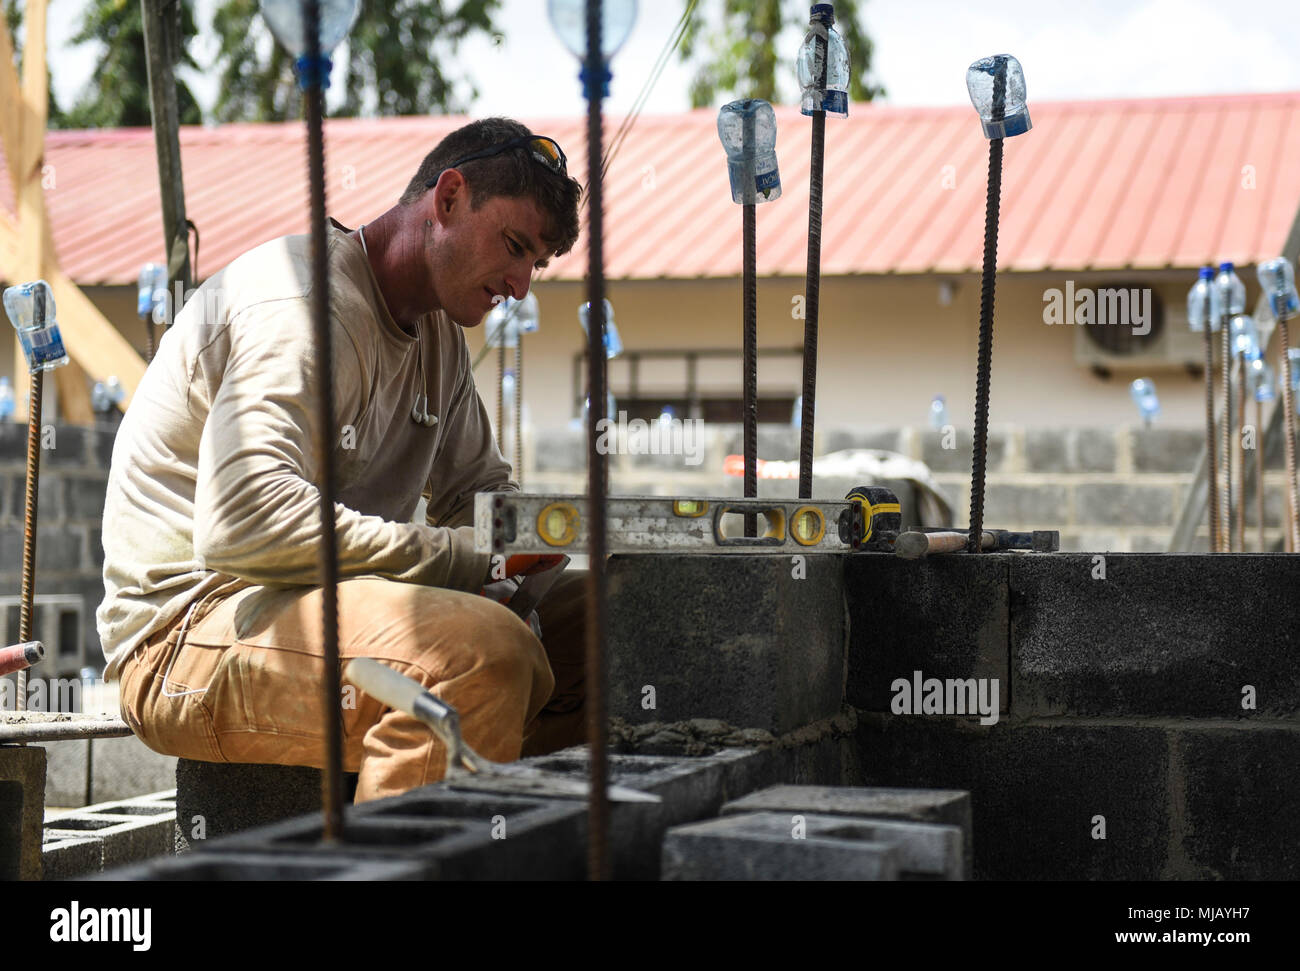 U.S Air Force Tech. Sgt. Carlos Spade, 346th Air Expeditionary Group Rapid Engineer Deployable Heavy Operational Repair Squadron Engineer member who is deployed from Nellis Air Force Base, Nev., ensures a concrete block is level April 27, 2018 at a construction site in Meteti, Panama. Spade is participating in Exercise New Horizons 2018, which will assist communities throughout Panama by providing medical assistance and building facilities such as schools, a youth community center and a women’s health ward. (U.S. Air Force photo by Senior Airman Dustin Mullen/Released) Stock Photo